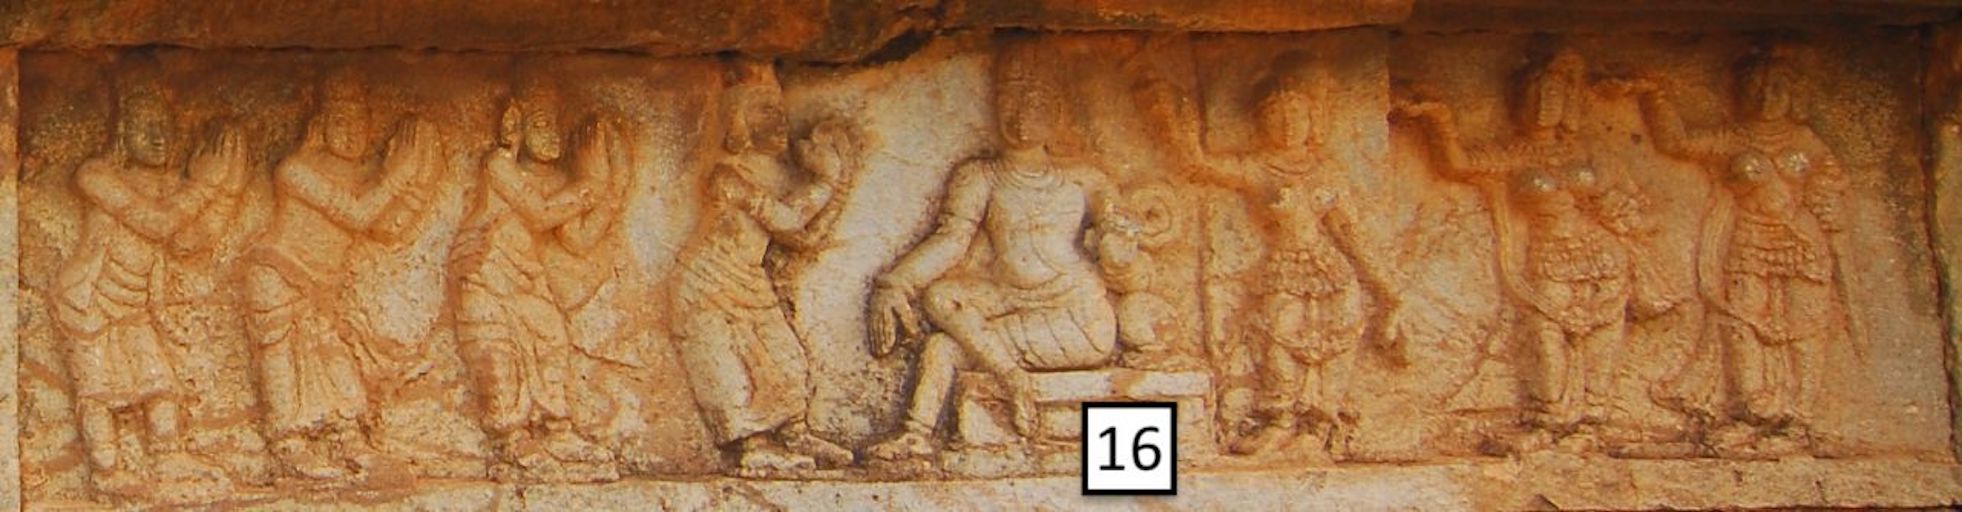 stone frieze with seated central figure and standing figures